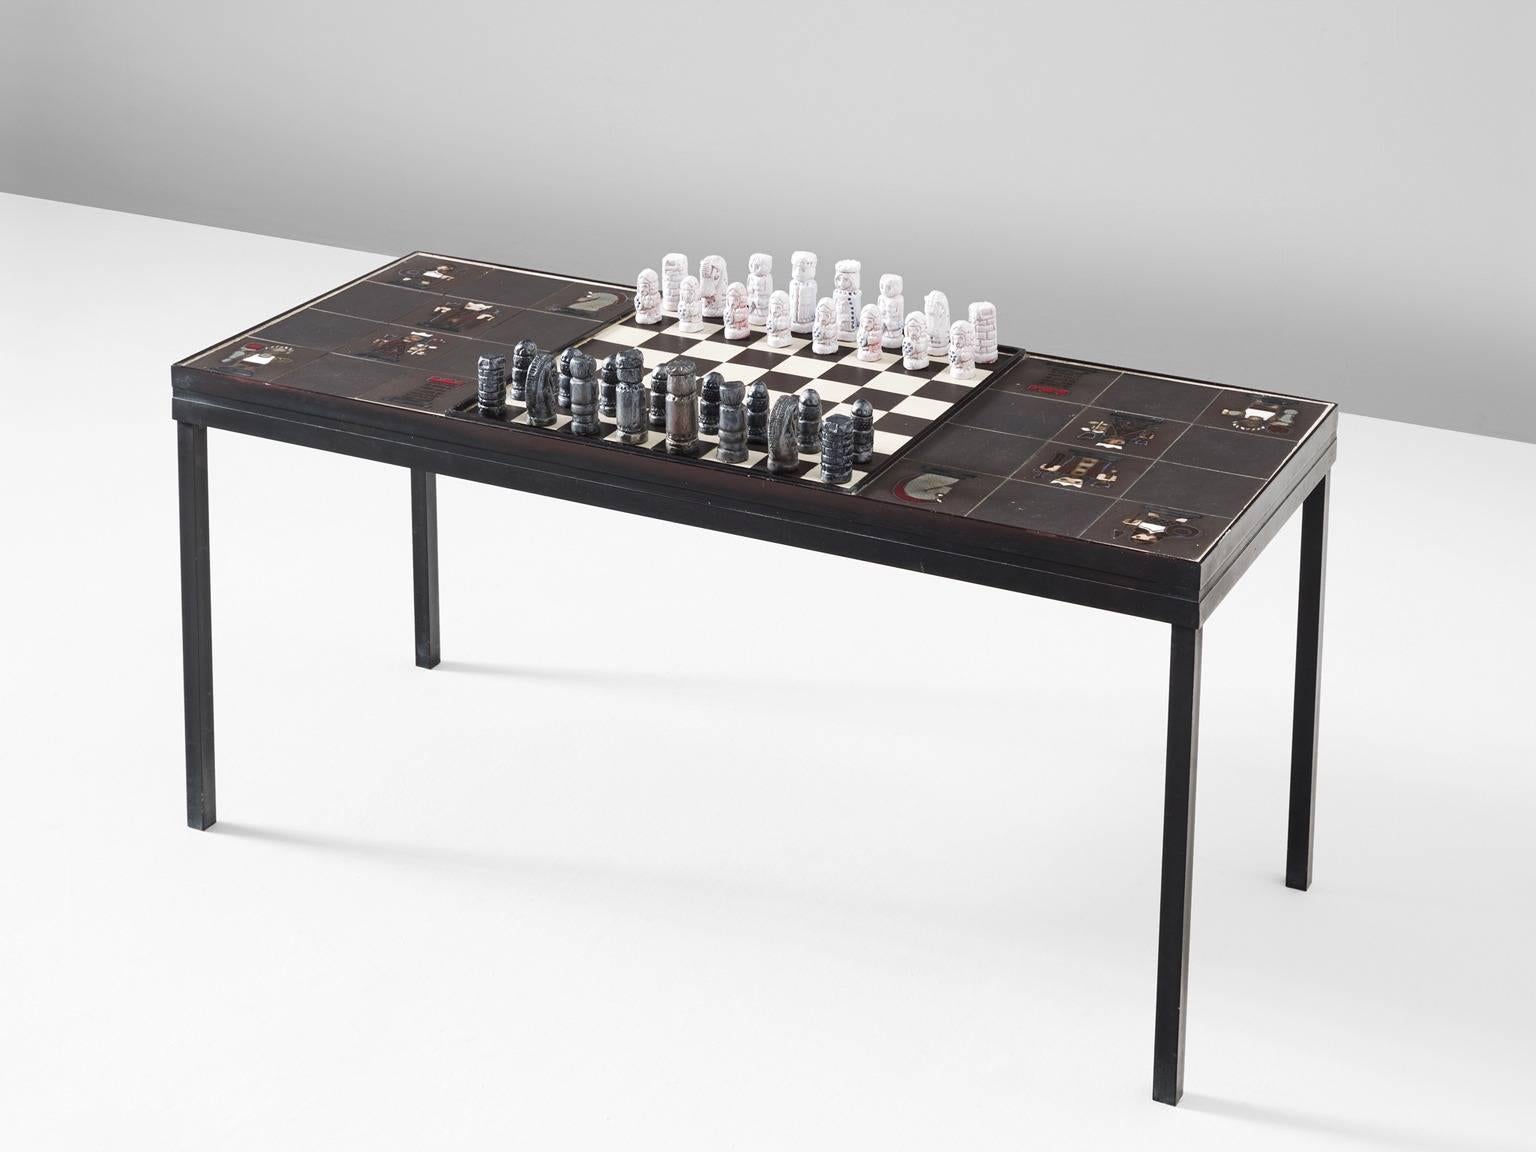 Table with ceramic chess pieces by Jan Ryheul for Perignem, Belgium, 1960s. 

Interesting table with chess-board and illustrations. The table consist of a metal base. On the top is the characteristic black-white chessboard and ceramic tiles with